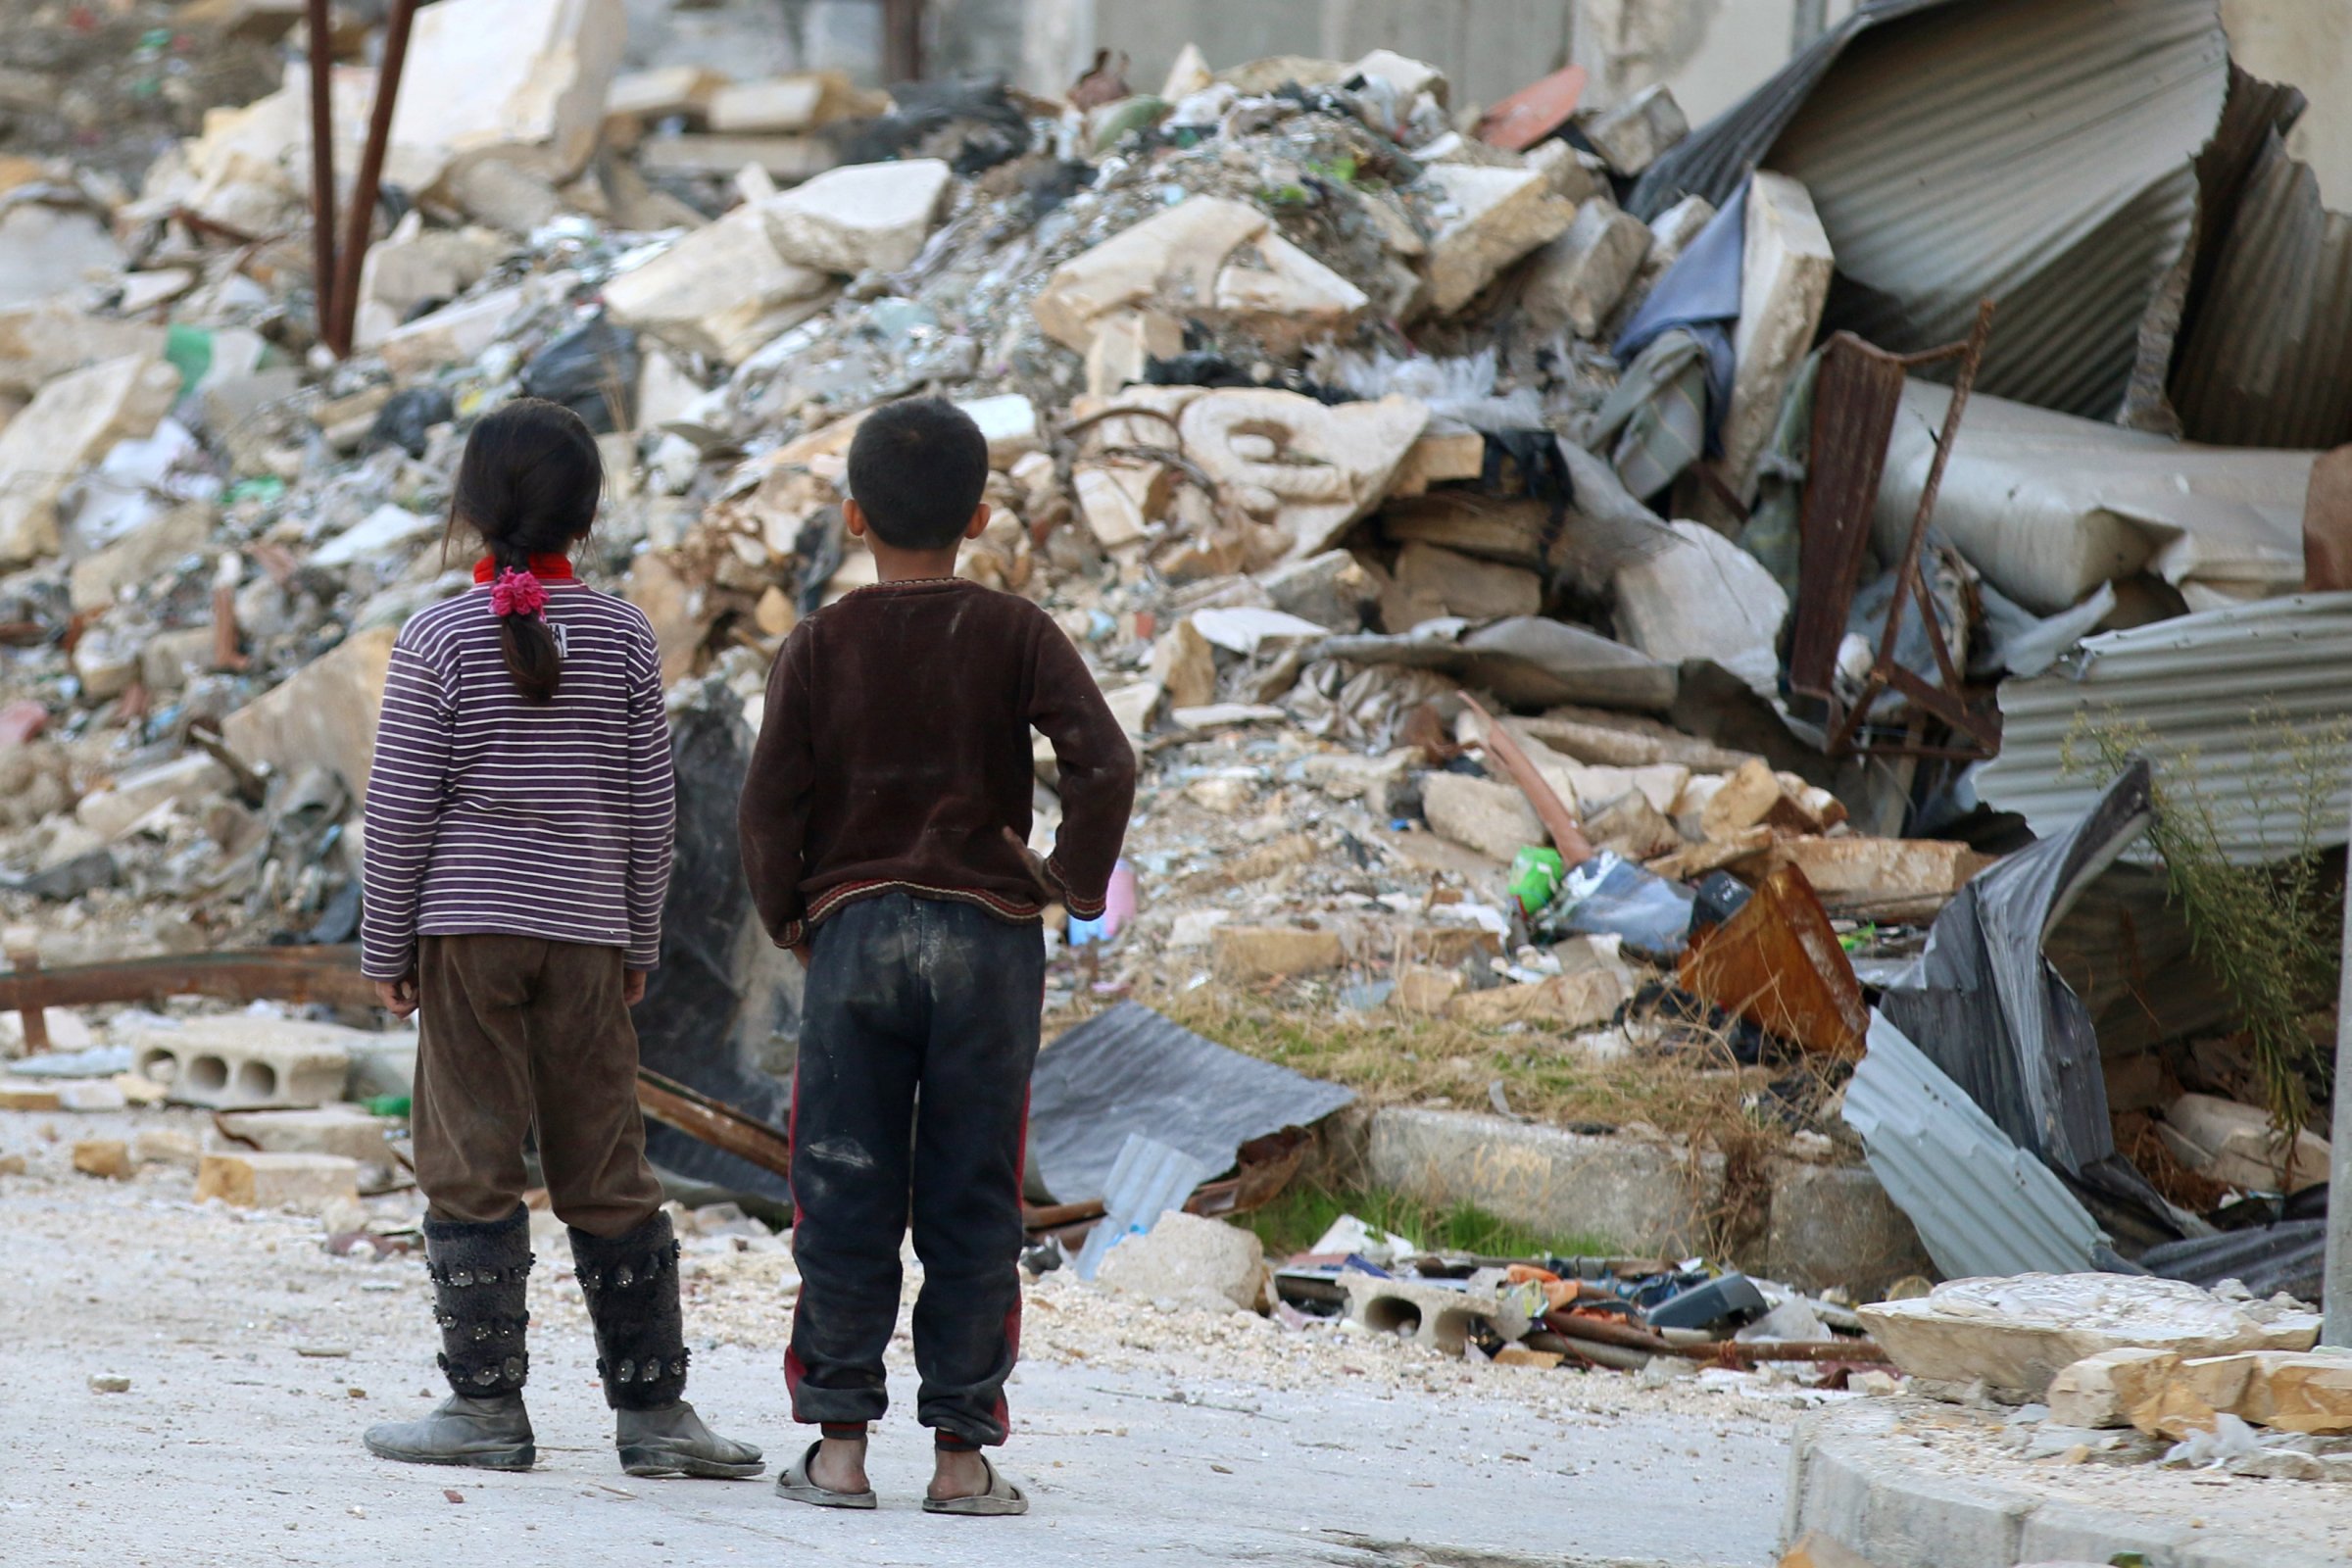 Children inspect rubble of damaged buildings in a rebel-held besieged area in Aleppo